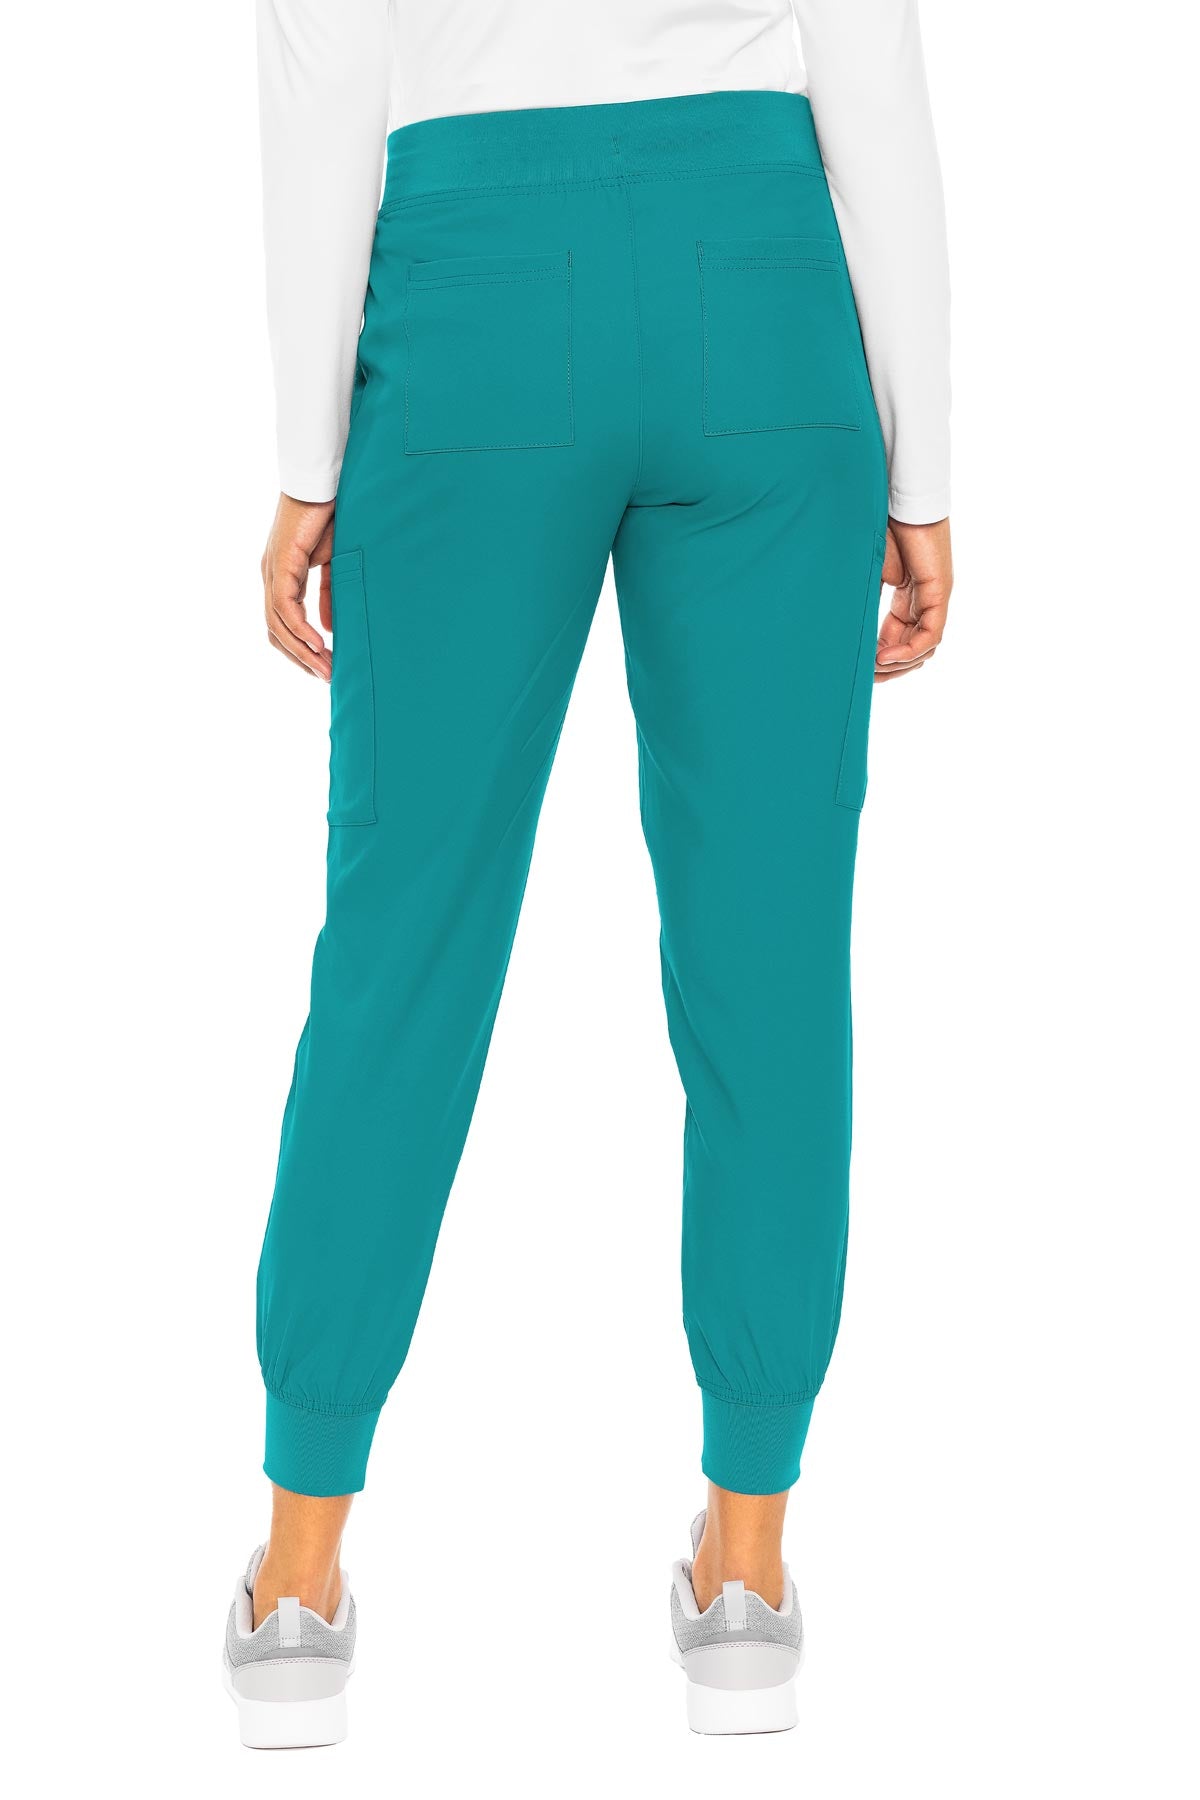 Med Couture 2711 Insight Women's Jogger Pant Teal Back